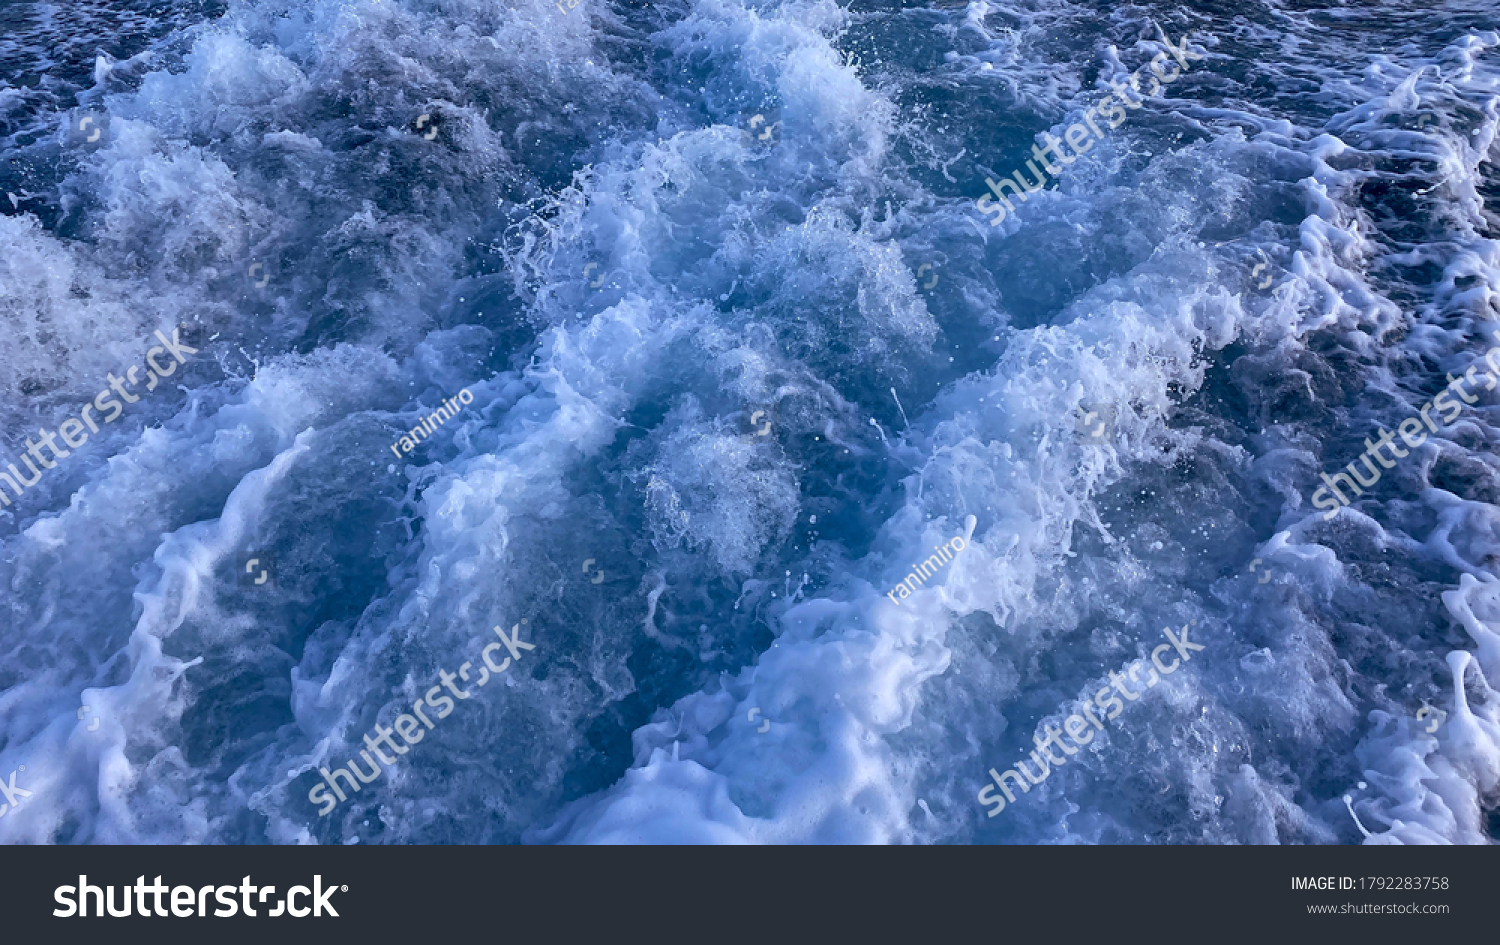 Seawater surface. White foam waves texture as a natural background. #1792283758